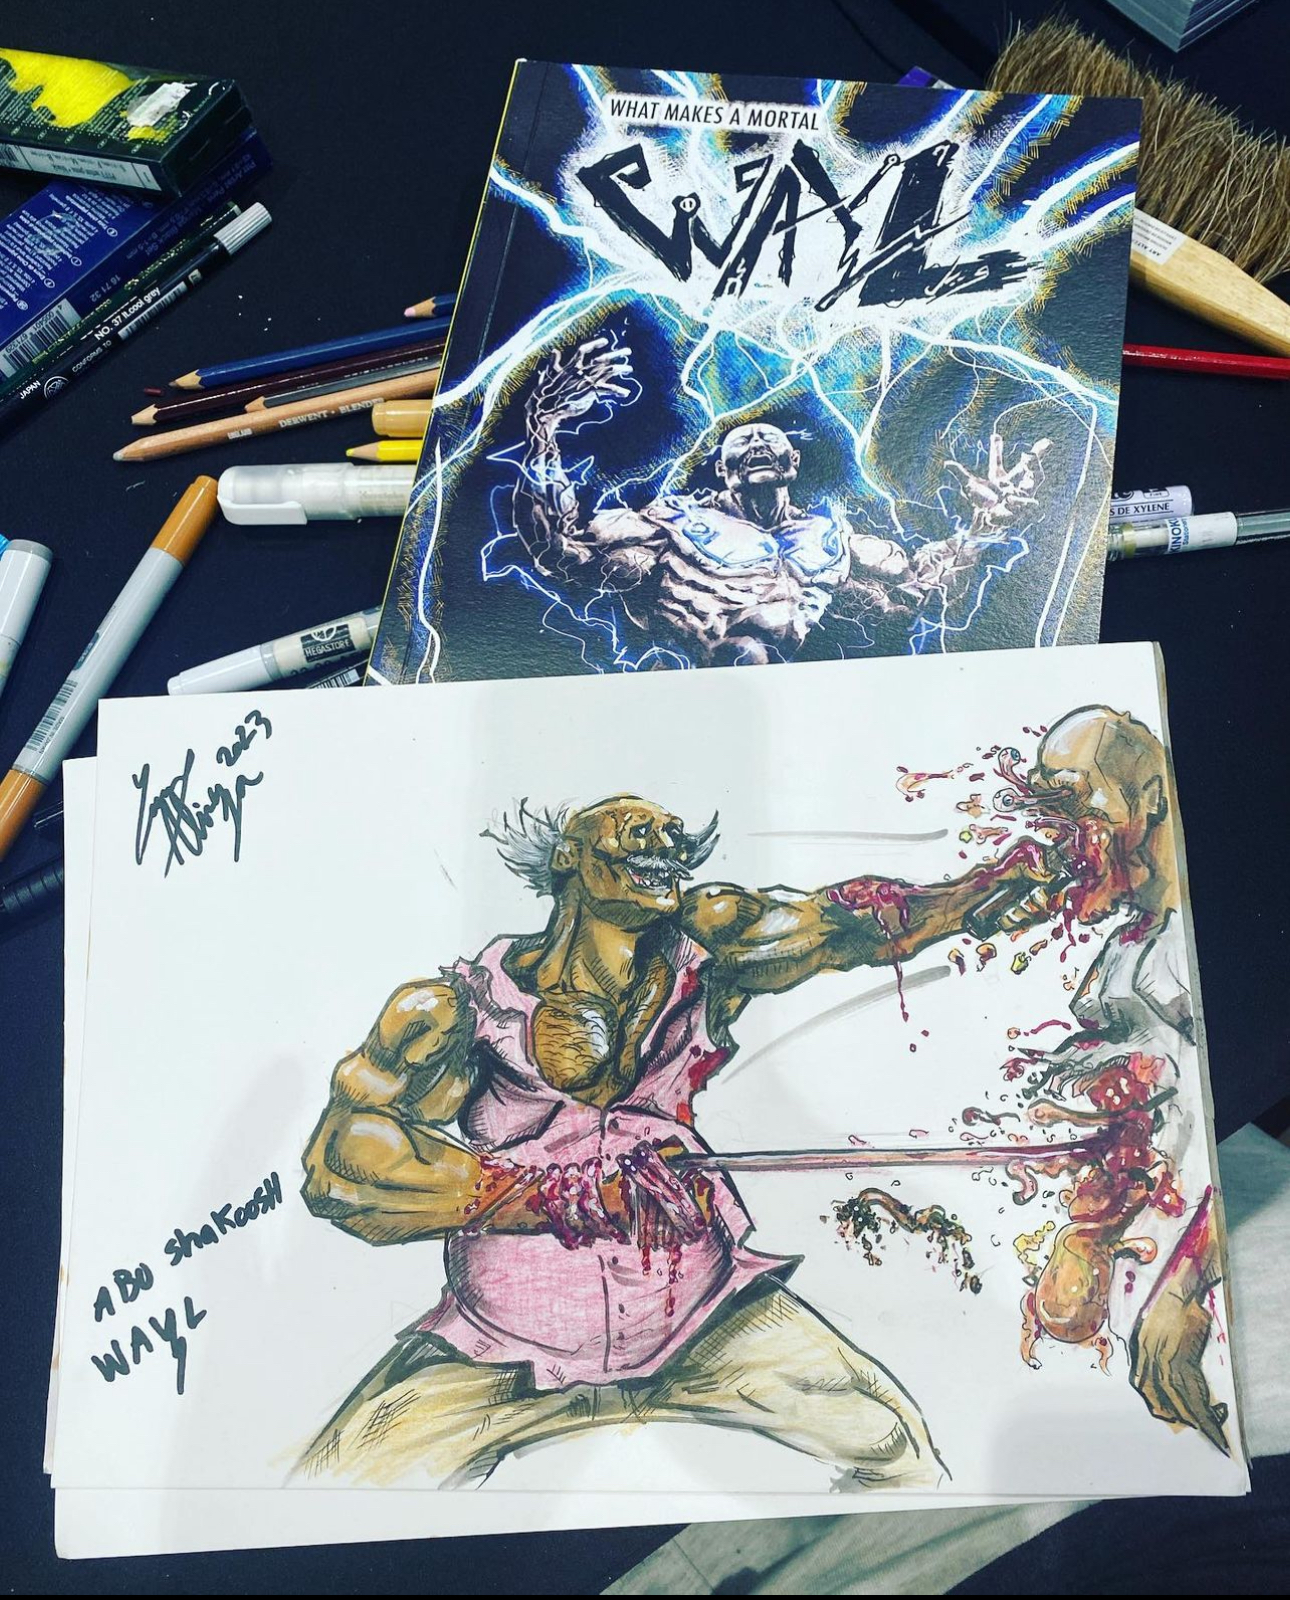 at MEFCC 2023: customer asked for a gory representation of Abu Shakoosh.